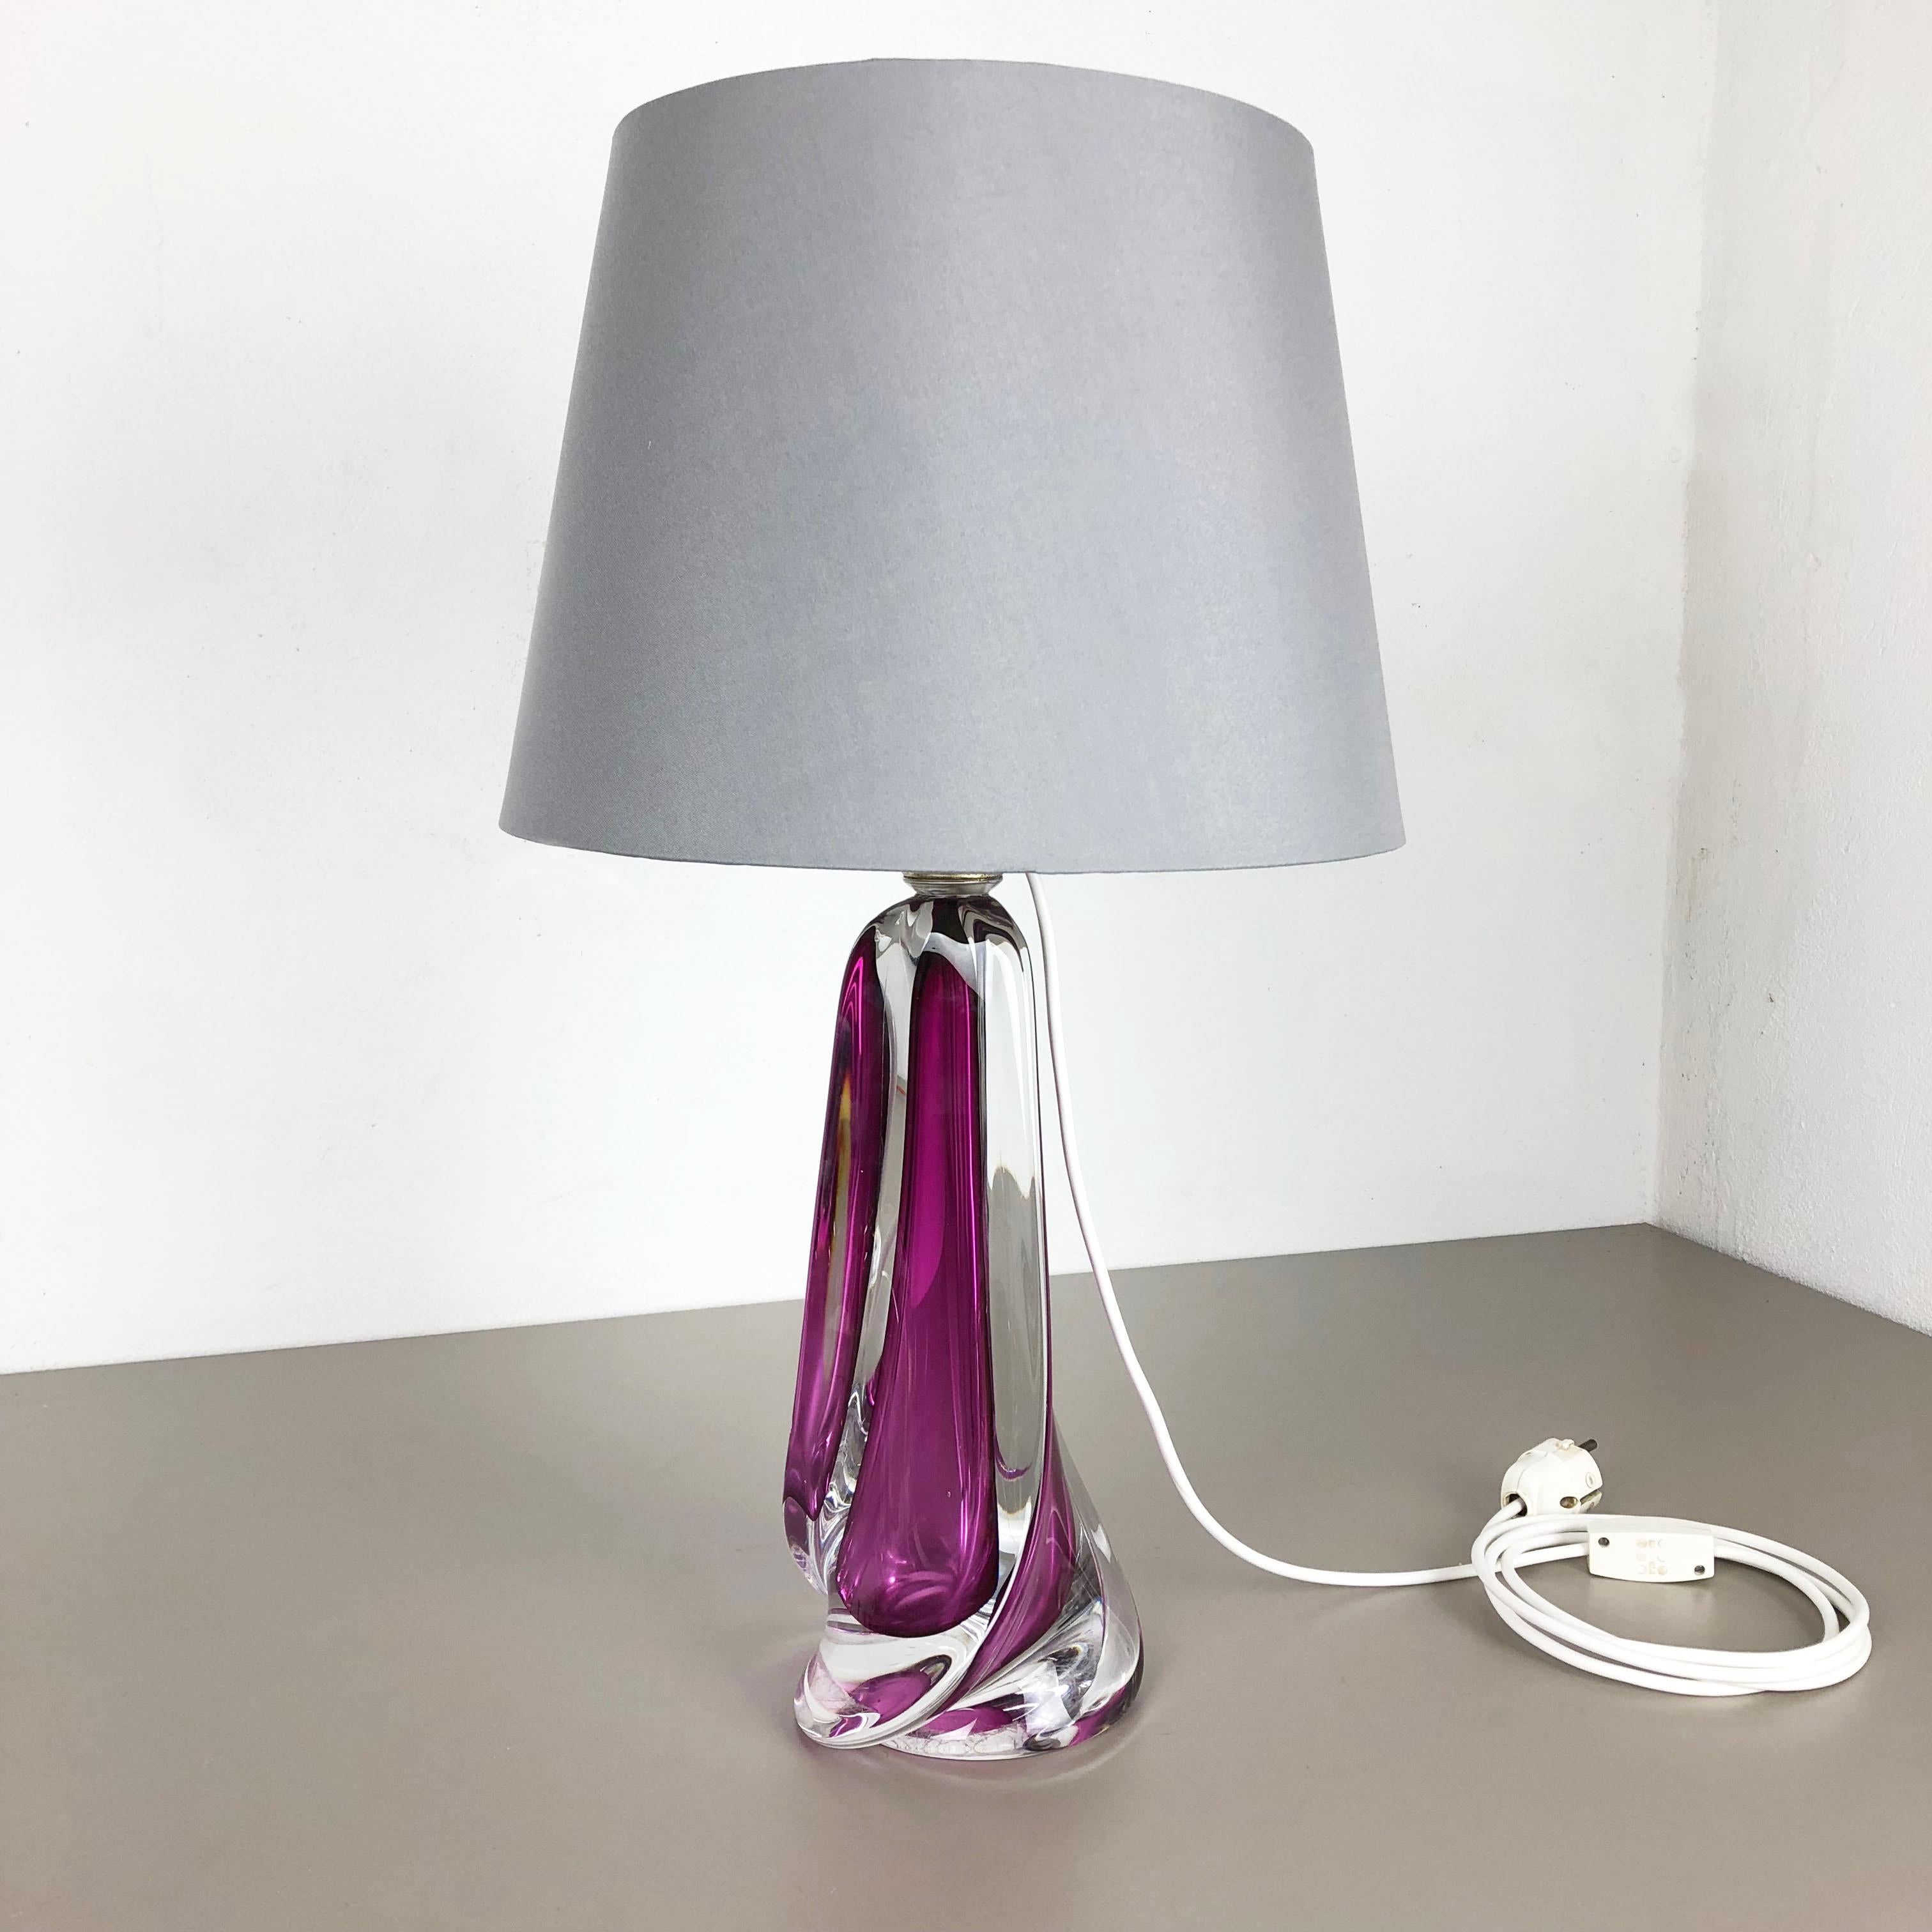 Article:

Table light crystal glass



Producer: 

Val Saint Lambert, Belgium


Origin: 

Belgium


Age: 

1960s



 

This fantastic vintage table light was designed and produced by Val Saint Lamberti n the 1960s in Belgium.